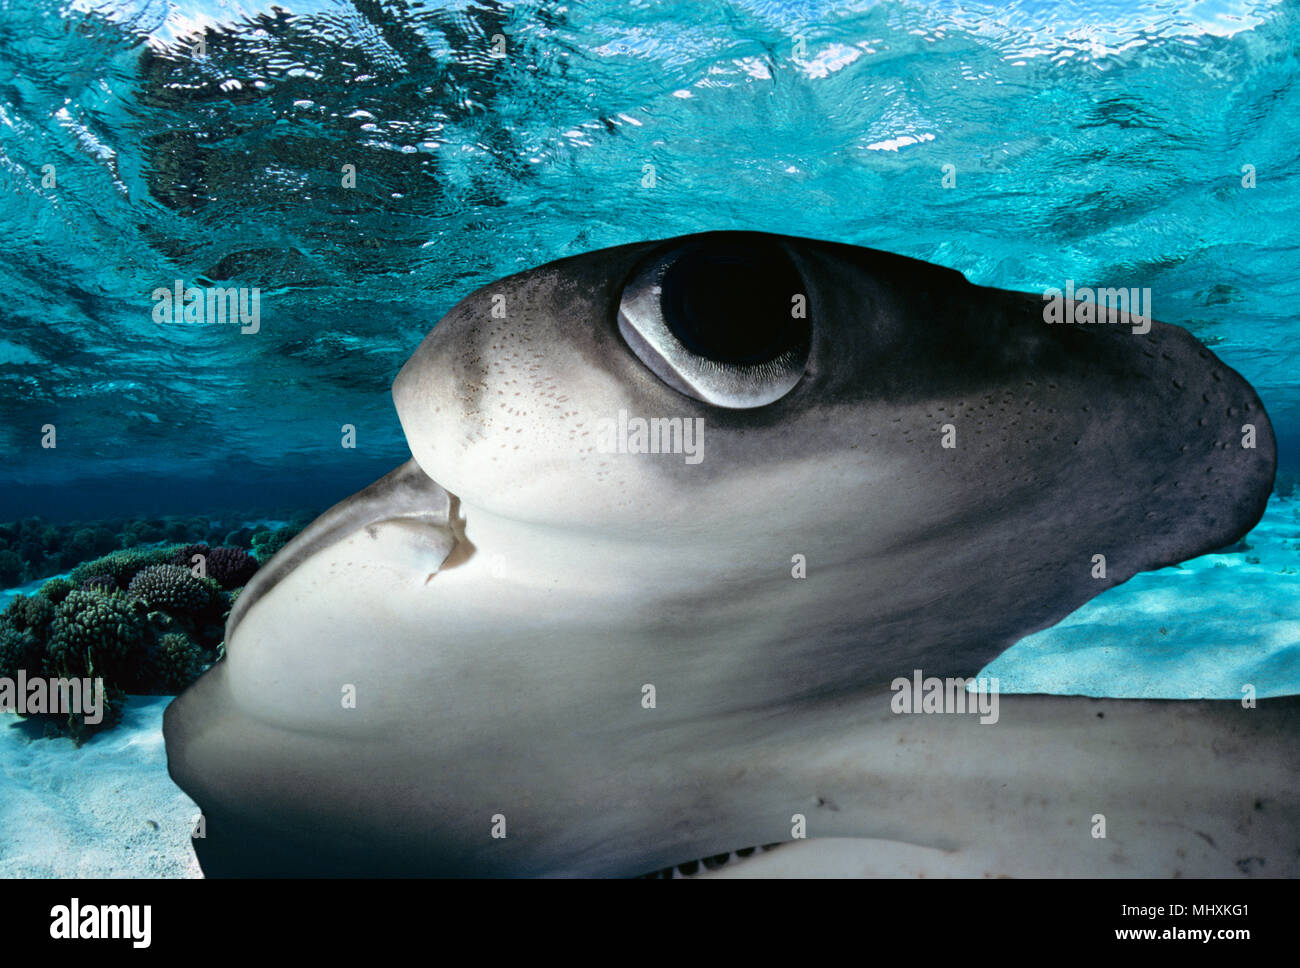 Scalloped Hammerhead Shark (Sphyrna lewini) at night, Cocos Island, Costa Rica - Pacific Ocean.  Image digitally altered to remove distracting or to a Stock Photo